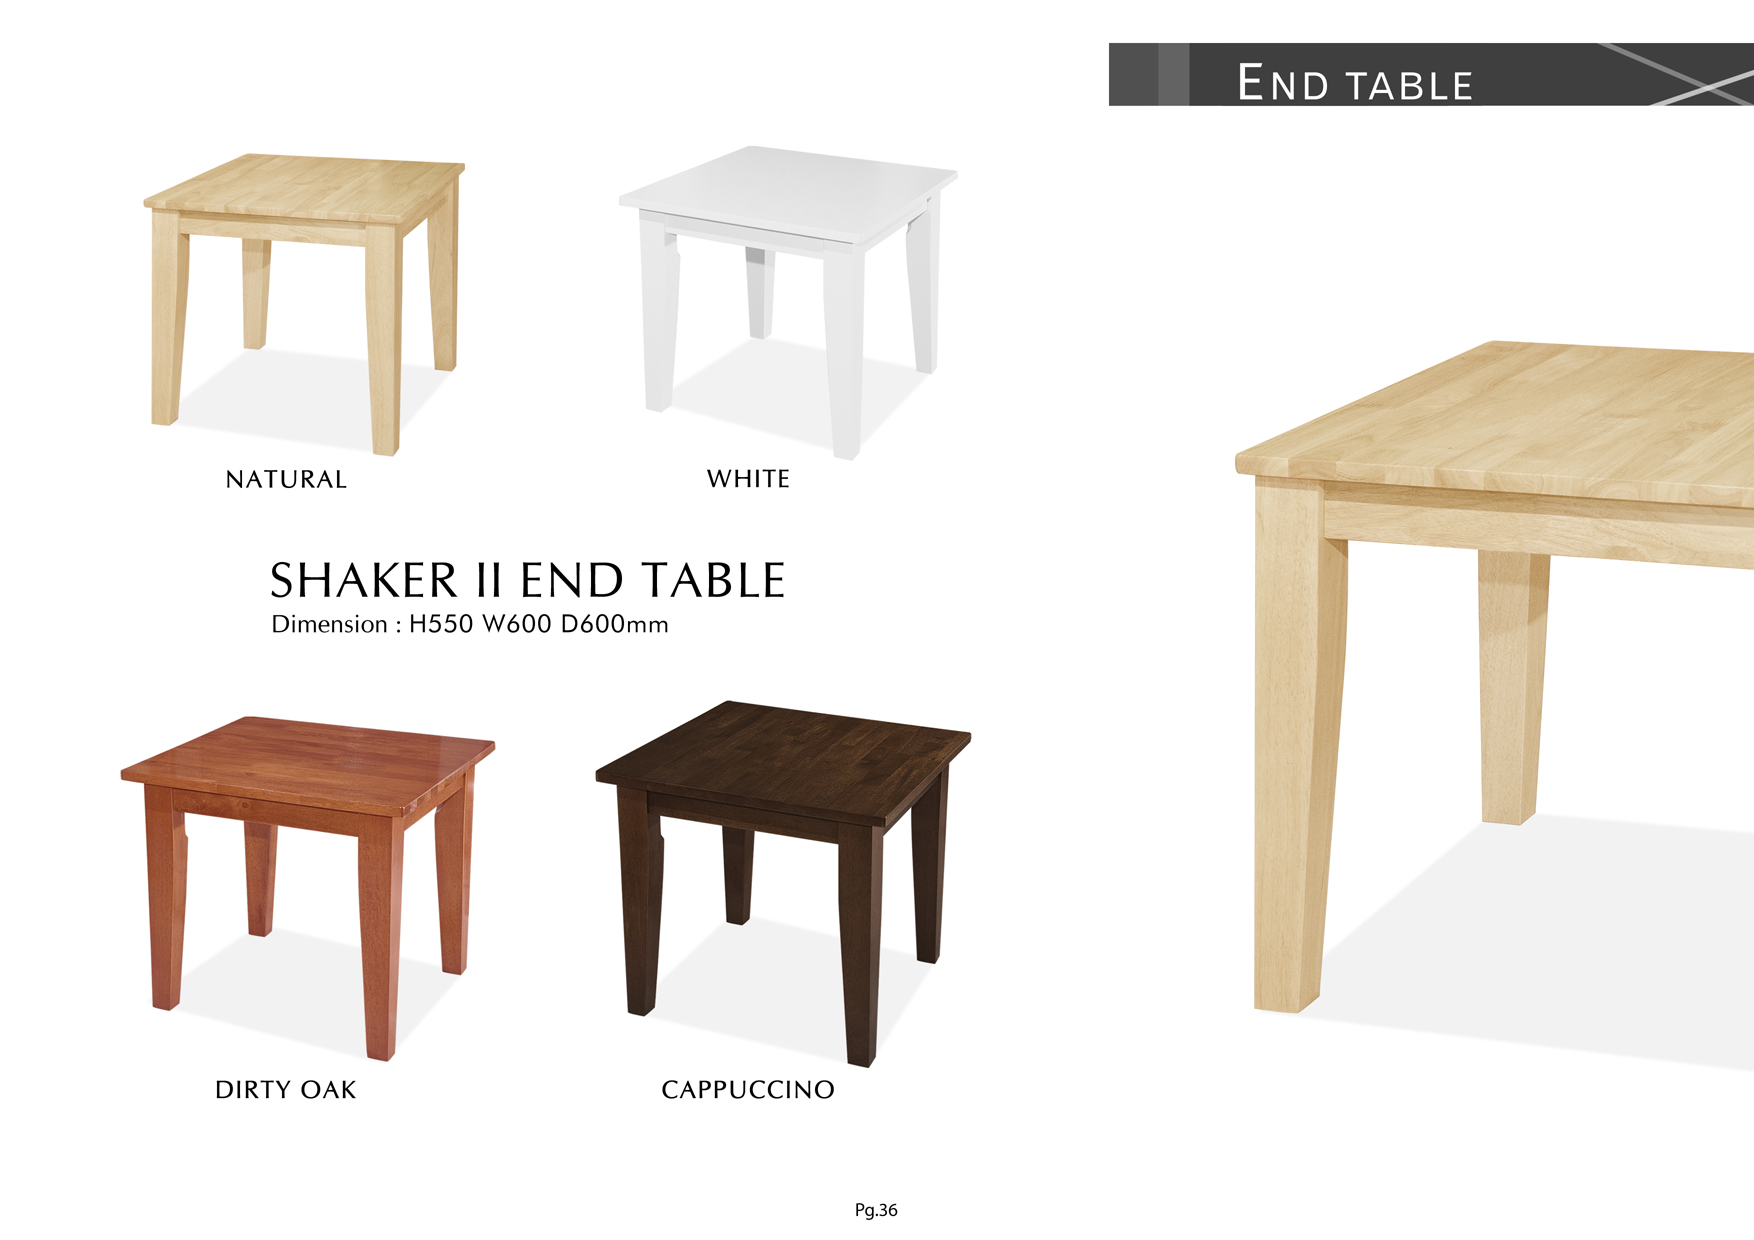 Product: PG36. SHAKER II END TABLE